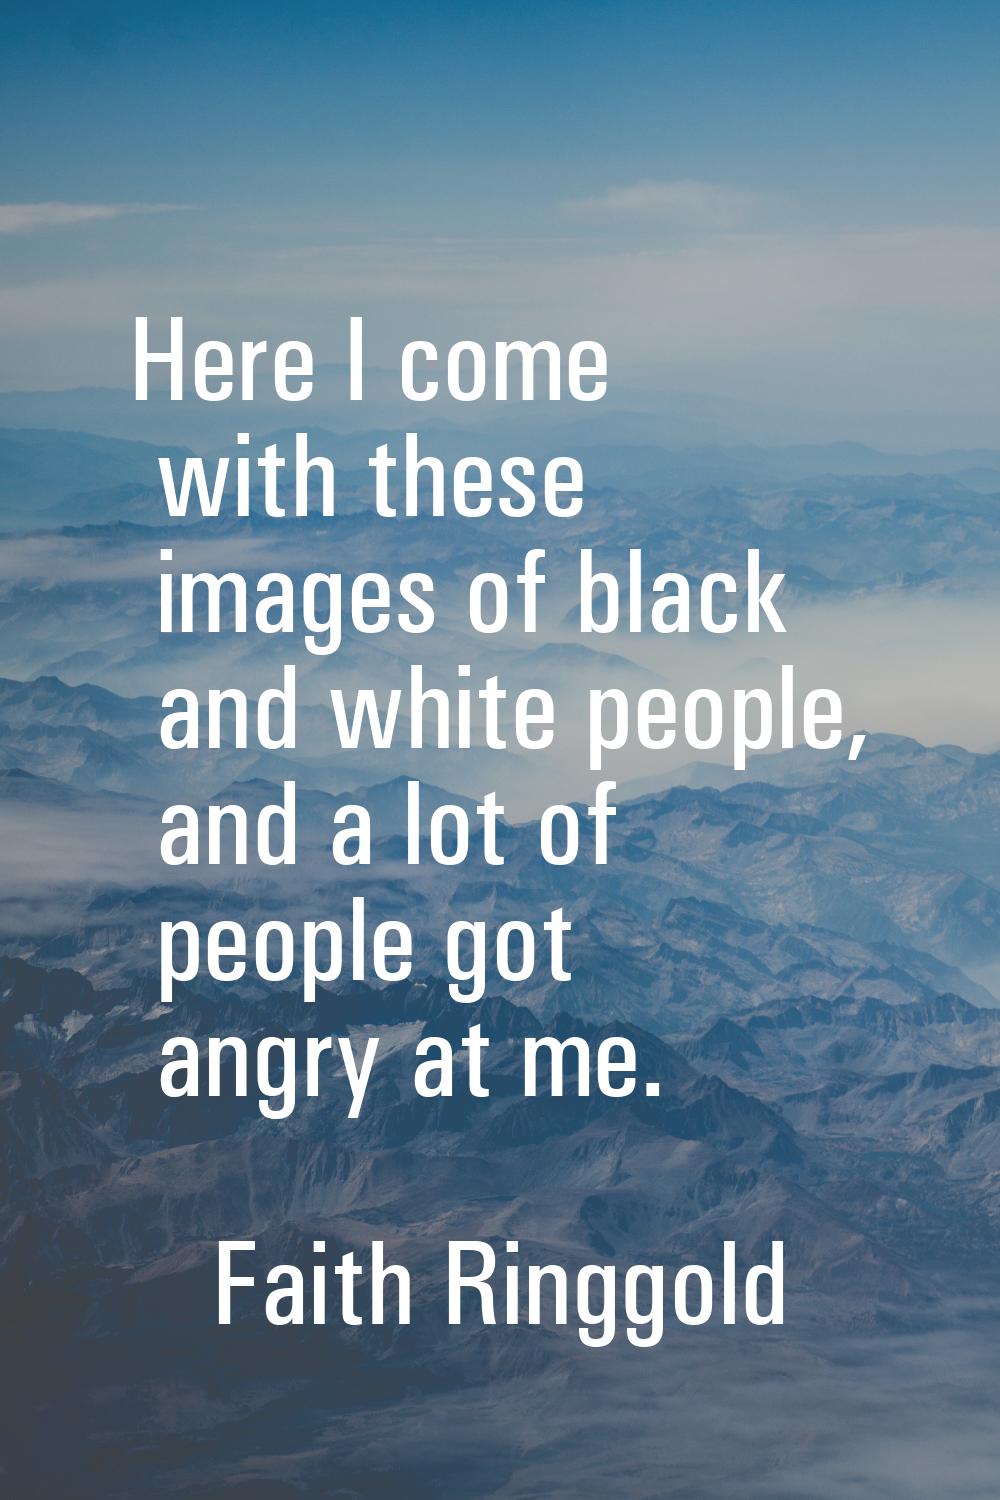 Here I come with these images of black and white people, and a lot of people got angry at me.